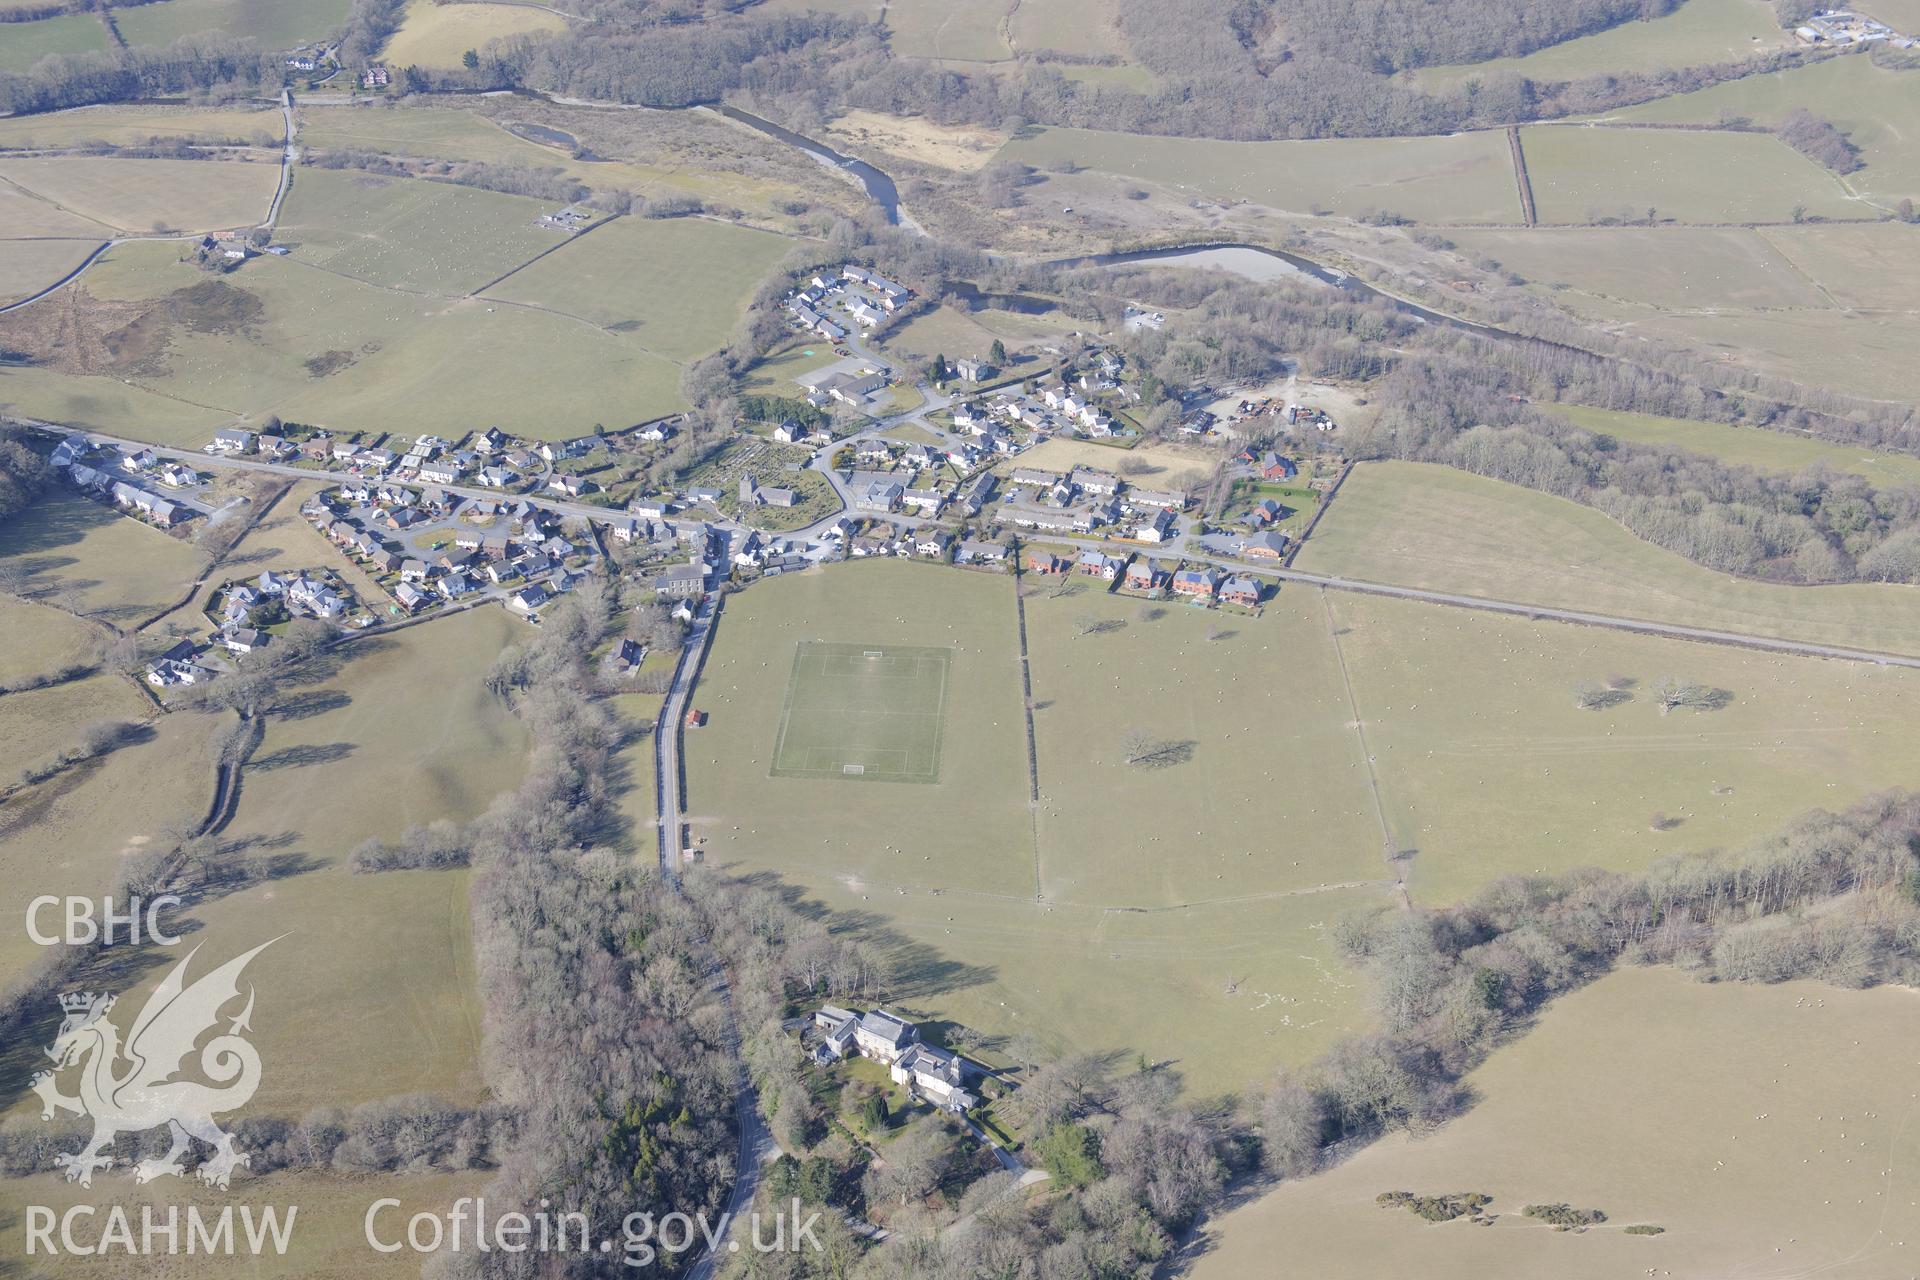 Castle Hill country house, with Llanilar to the north, south east of Aberystwyth. Oblique aerial photograph taken during the Royal Commission?s programme of archaeological aerial reconnaissance by Toby Driver on 2nd April 2015.